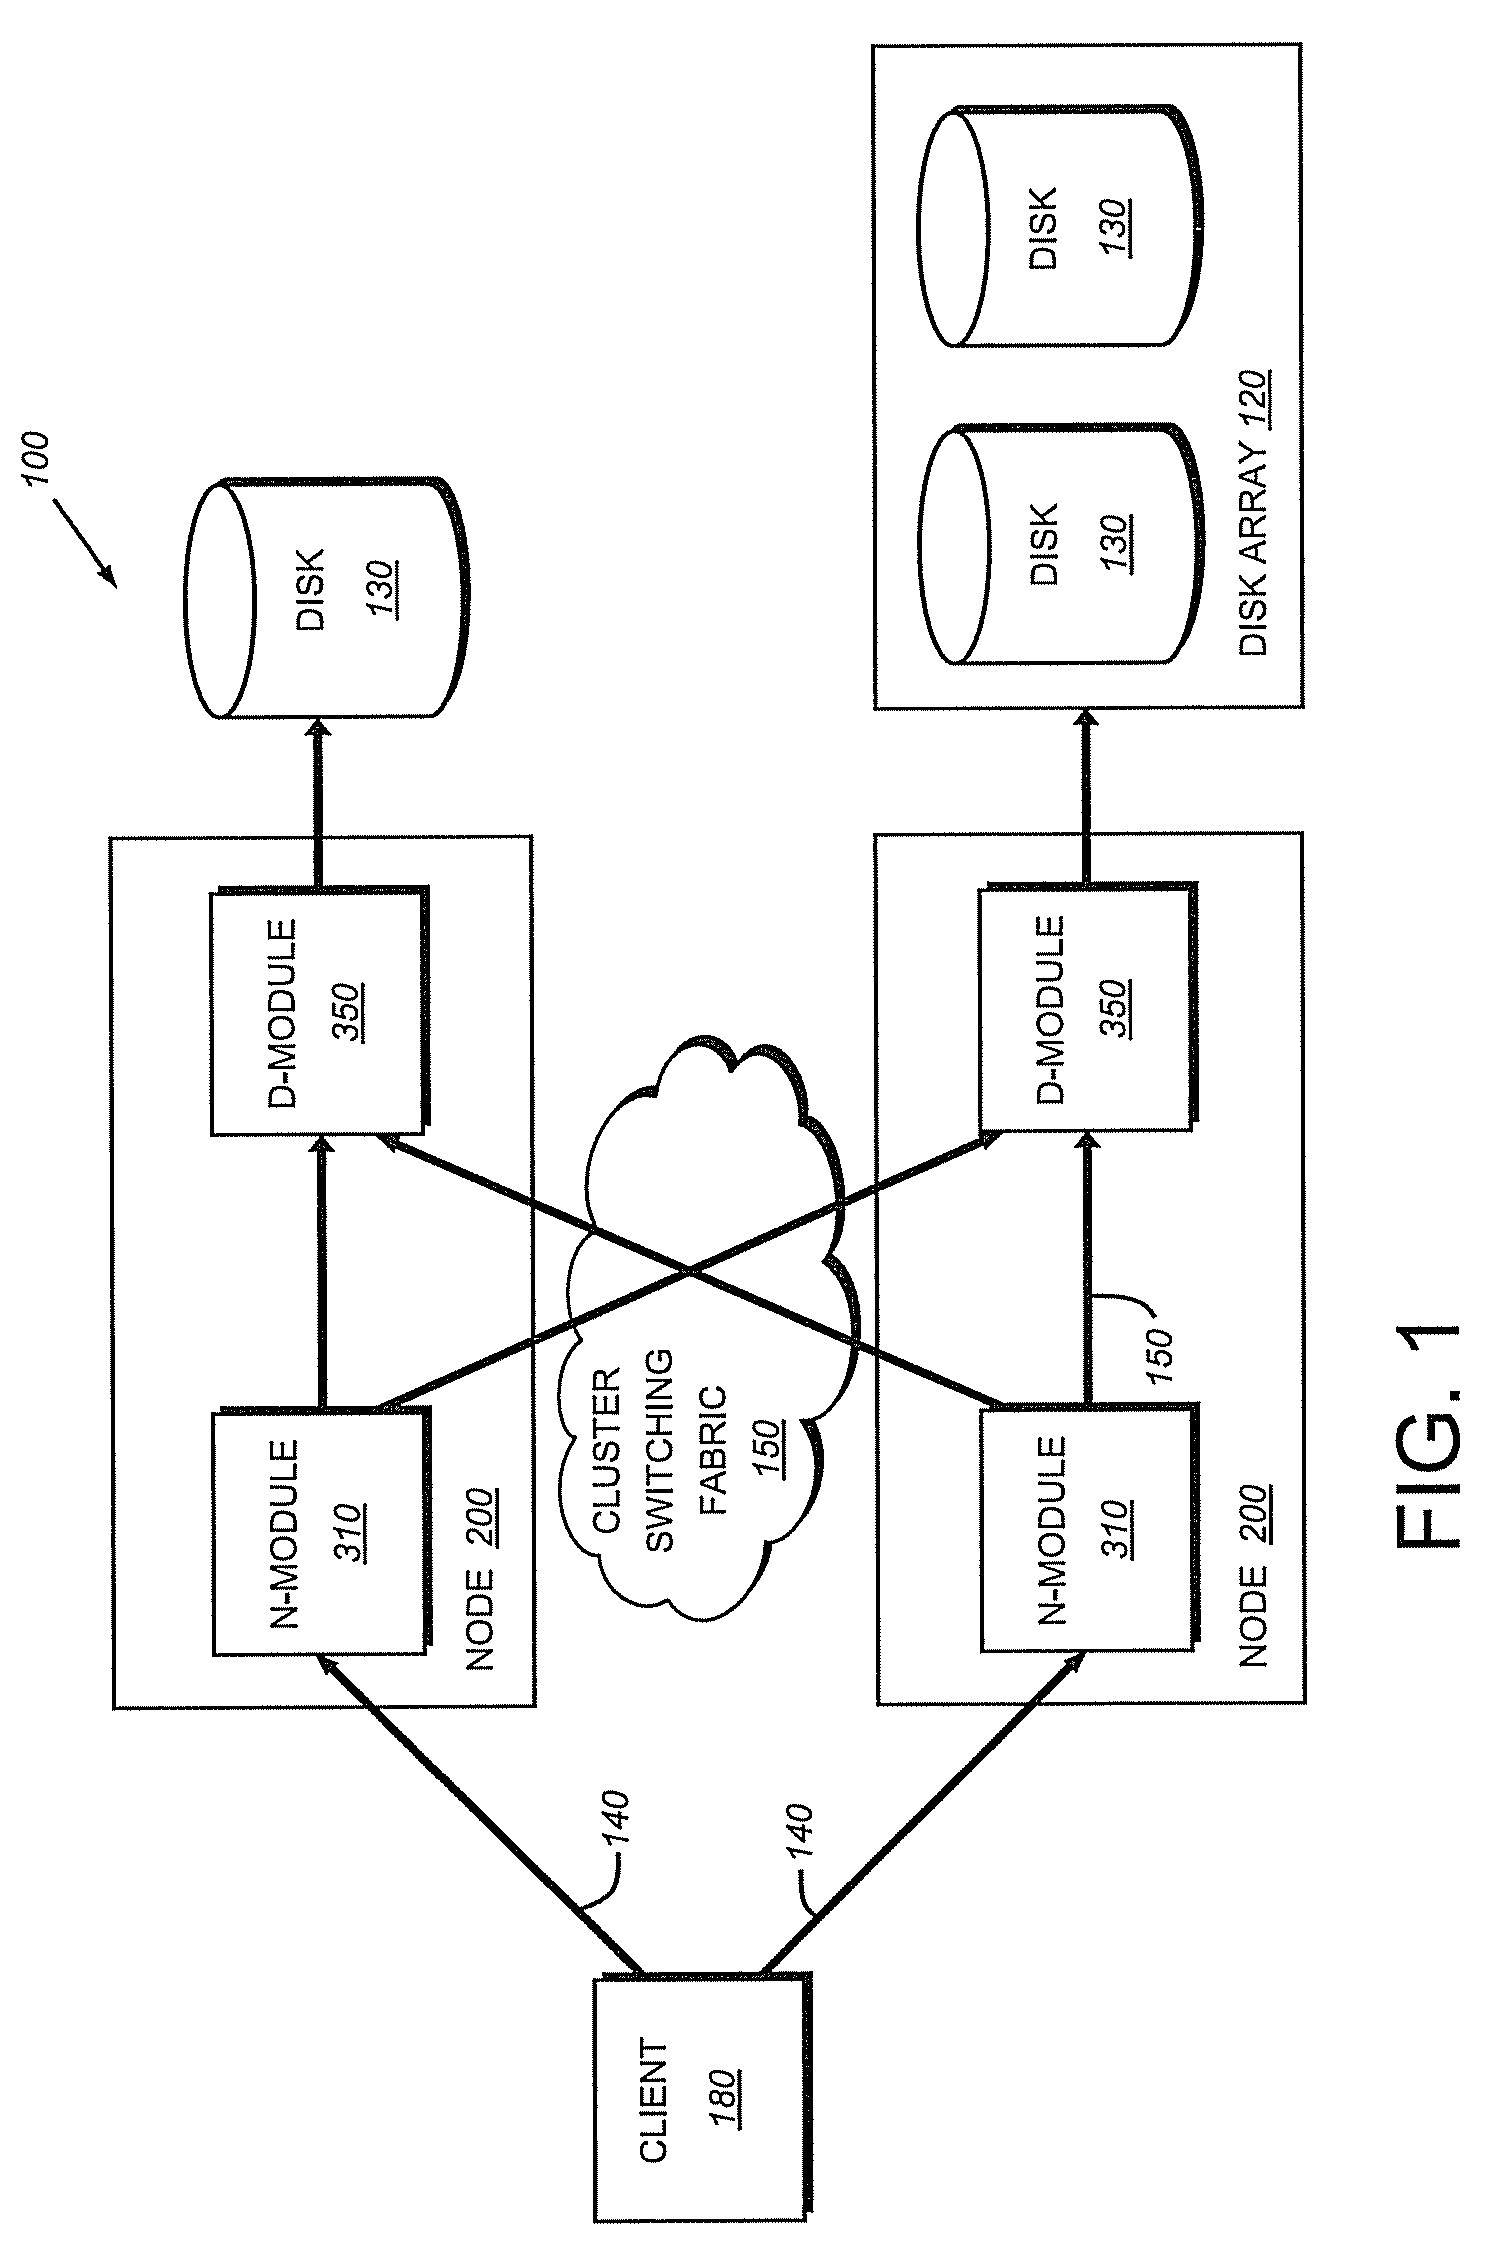 Data distribution through capacity leveling in a striped file system